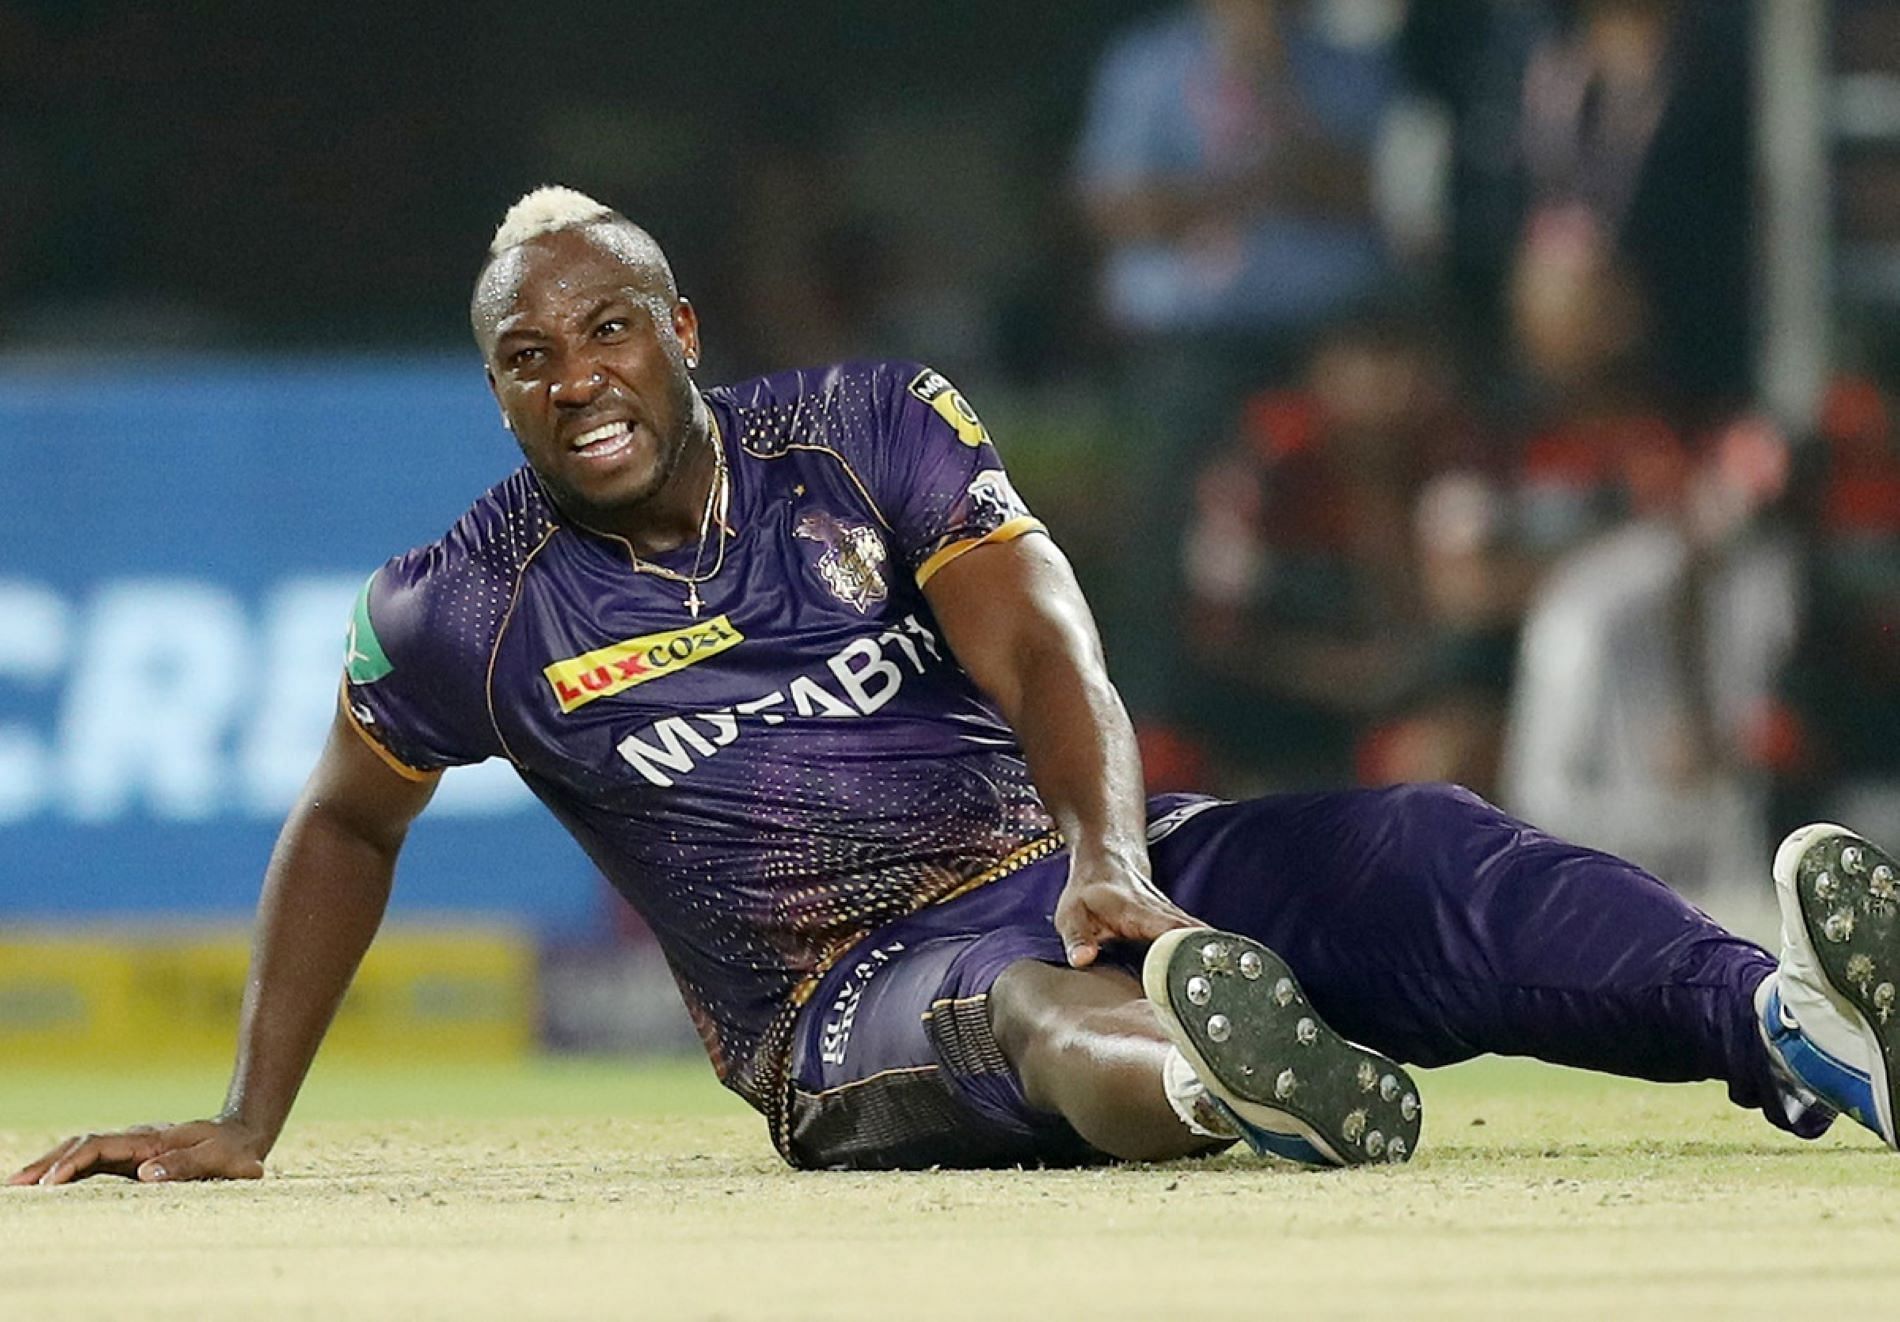 Andre Russell has been notoriously injured to bowl his full quota for KKR.